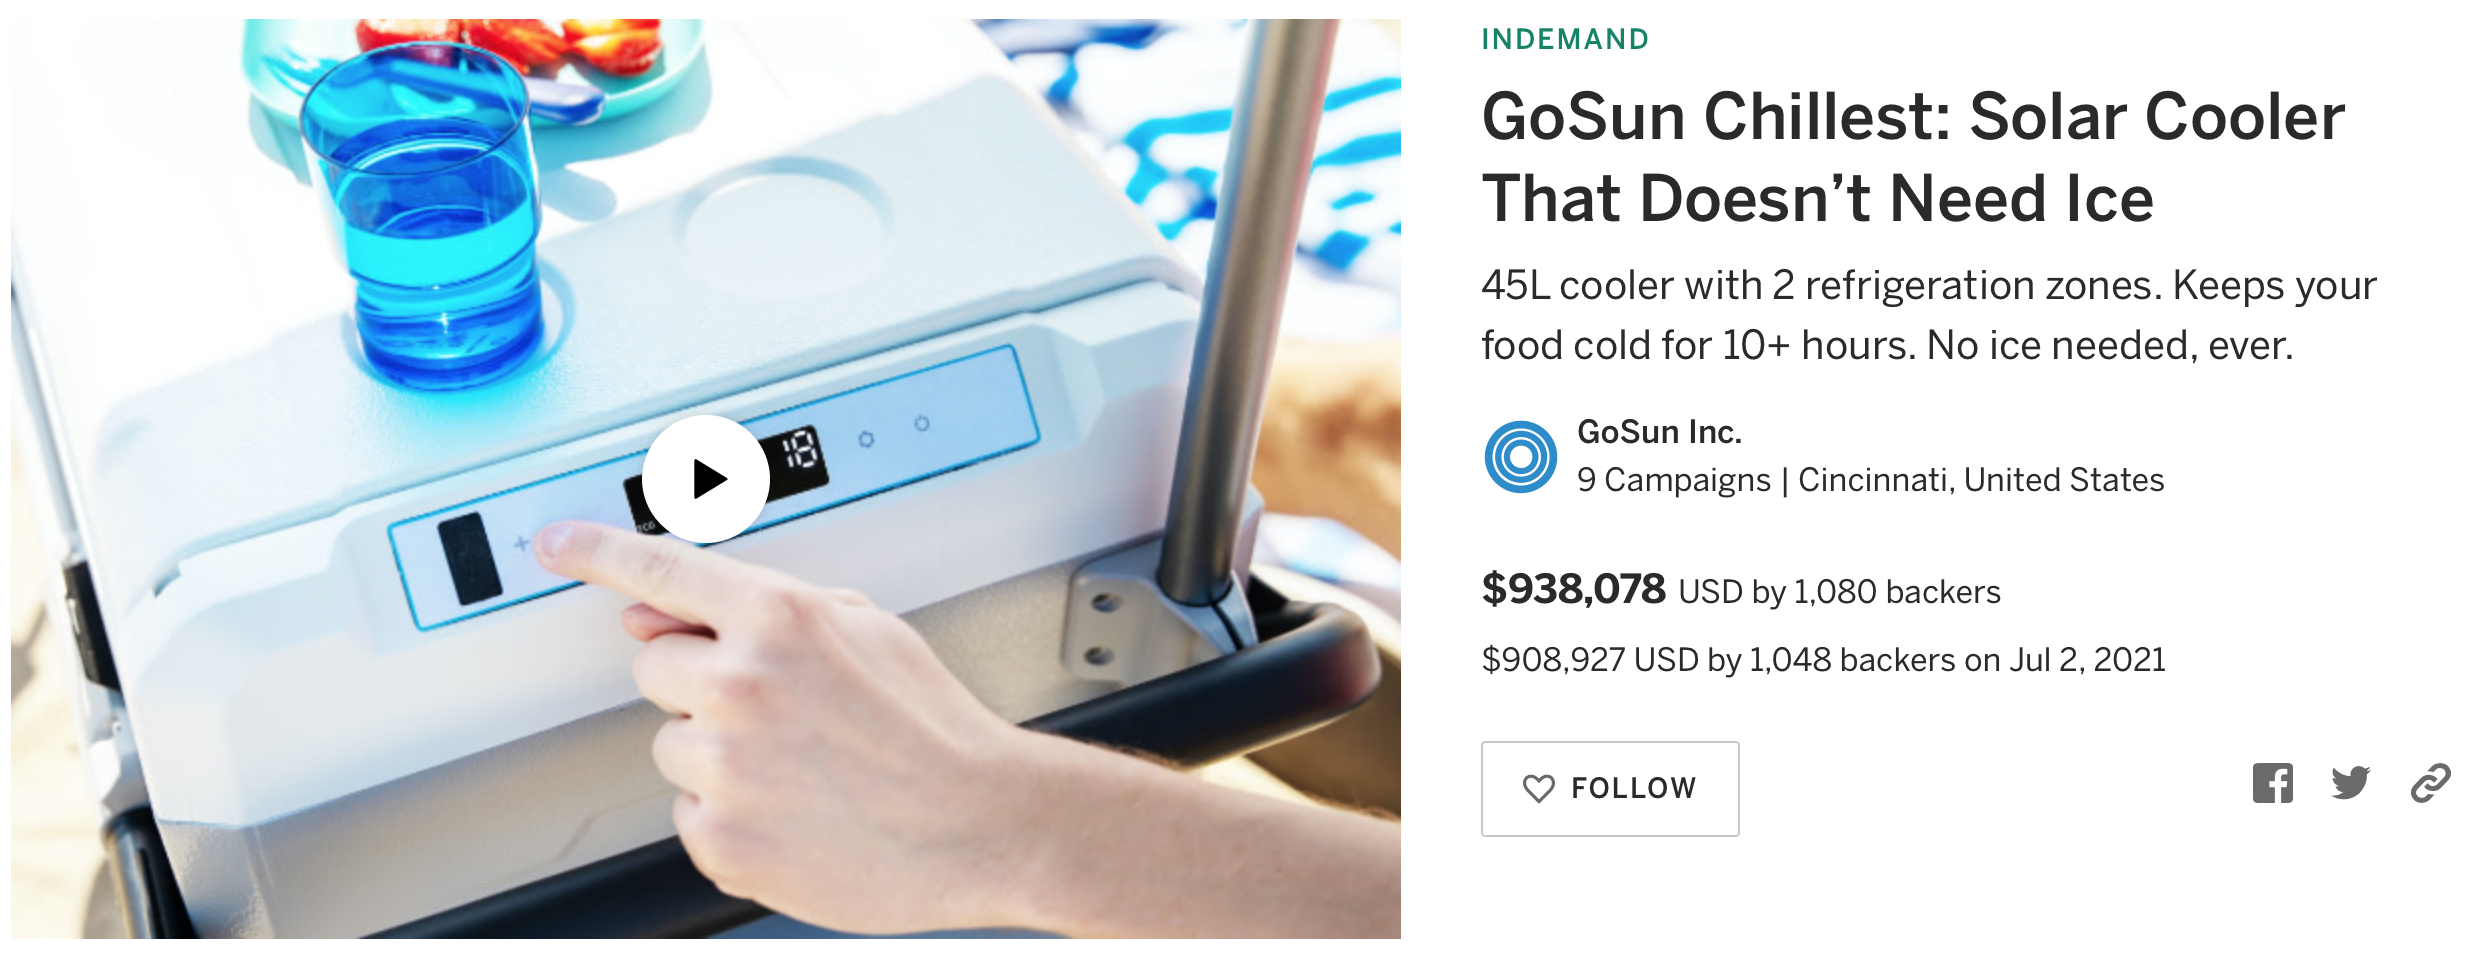 How we raised $938,078 for GoSun Chillest on Indiegogo [CASE STUDY]